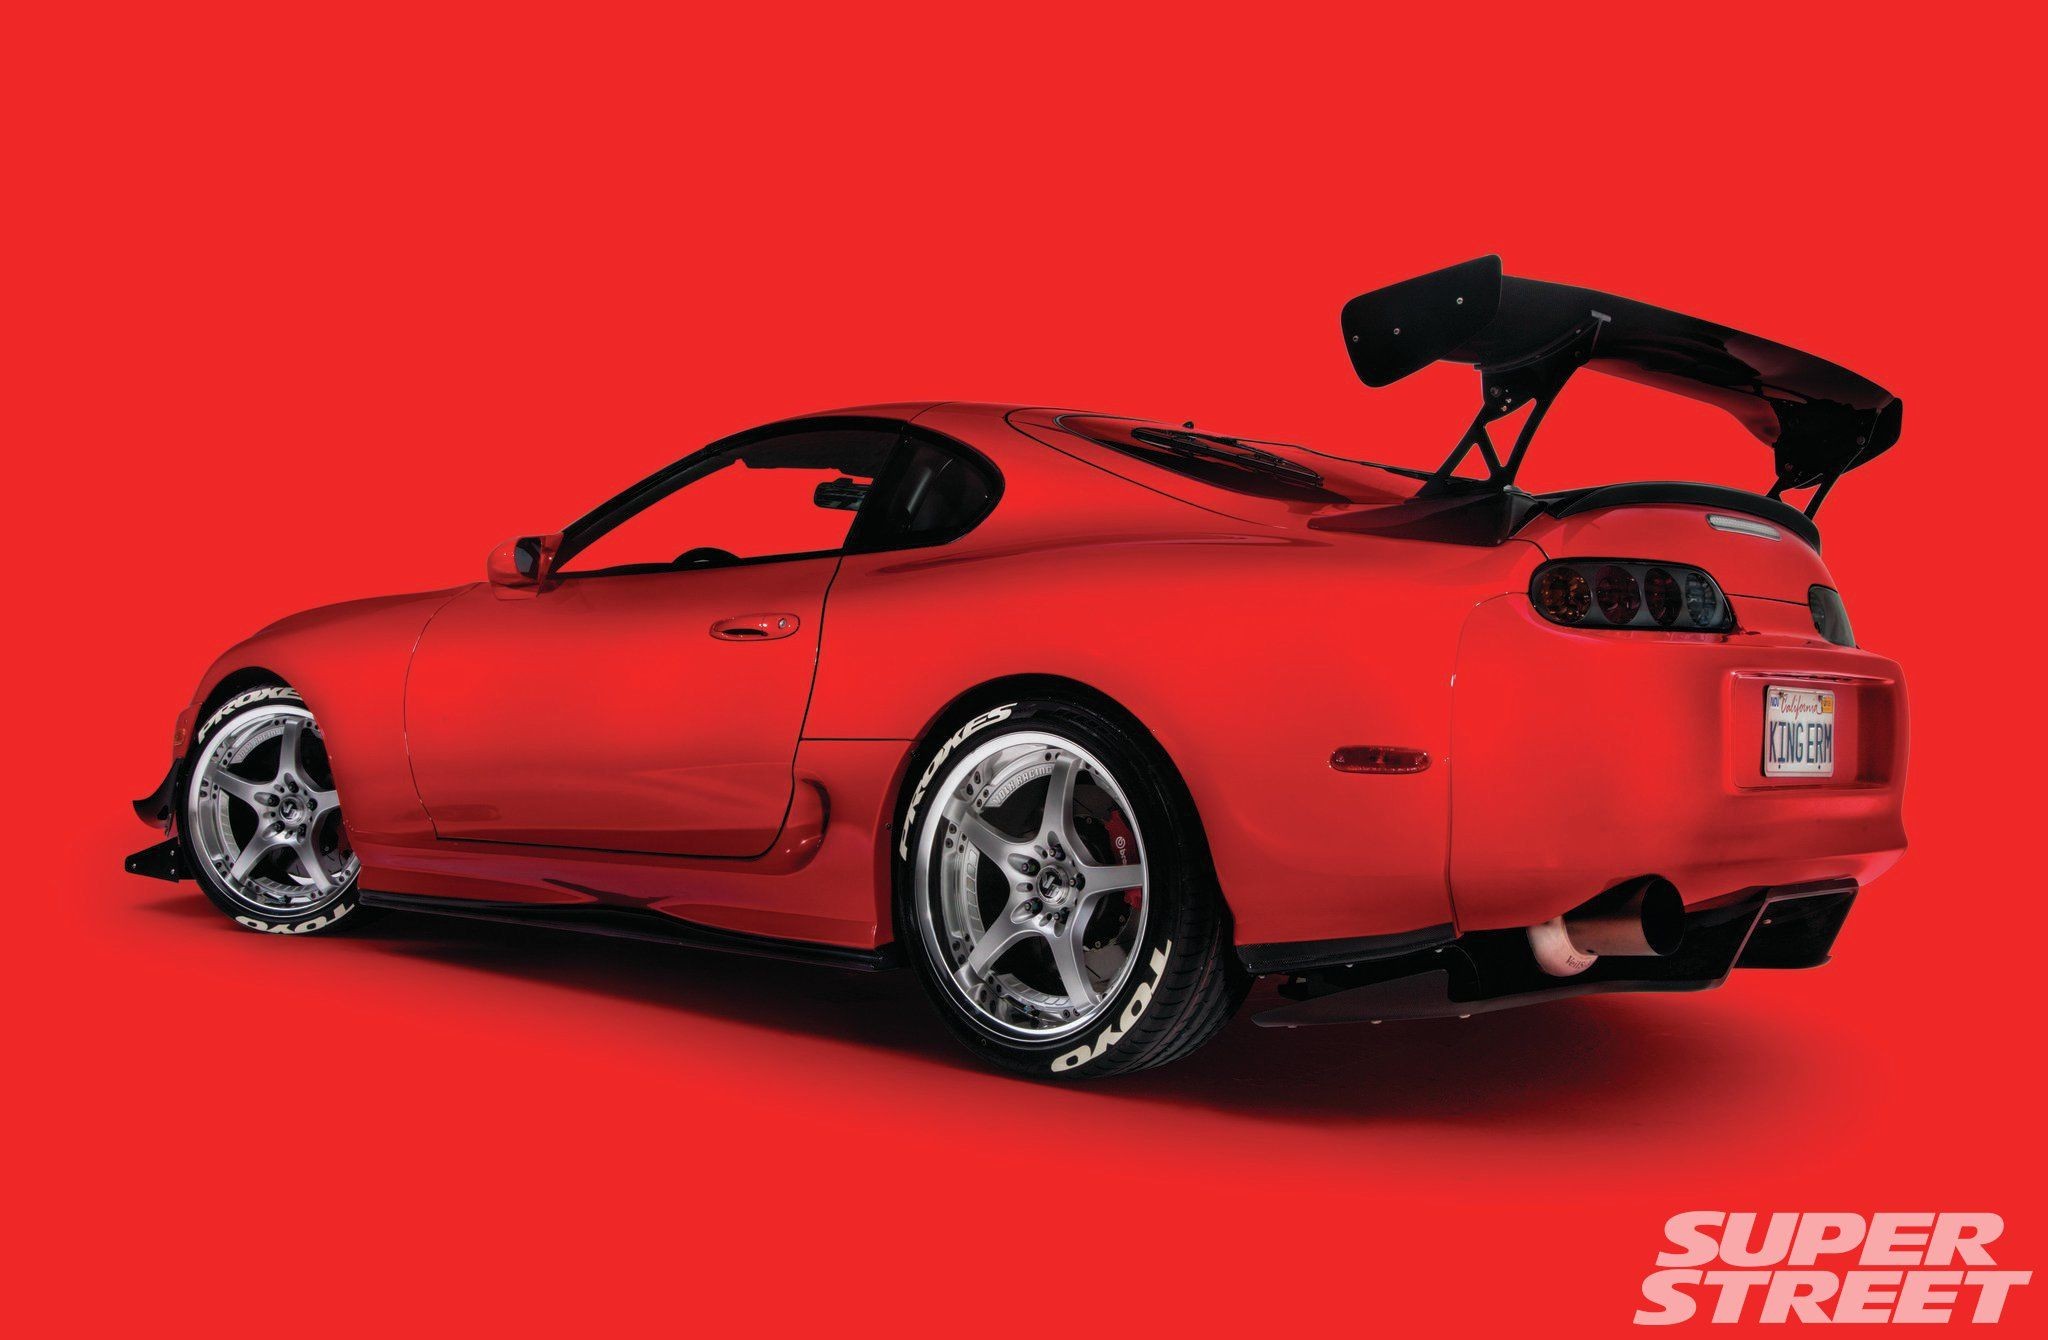 General 2048x1340 car vehicle red cars red background Toyota Supra Toyota car spoiler Japanese cars simple background watermarked